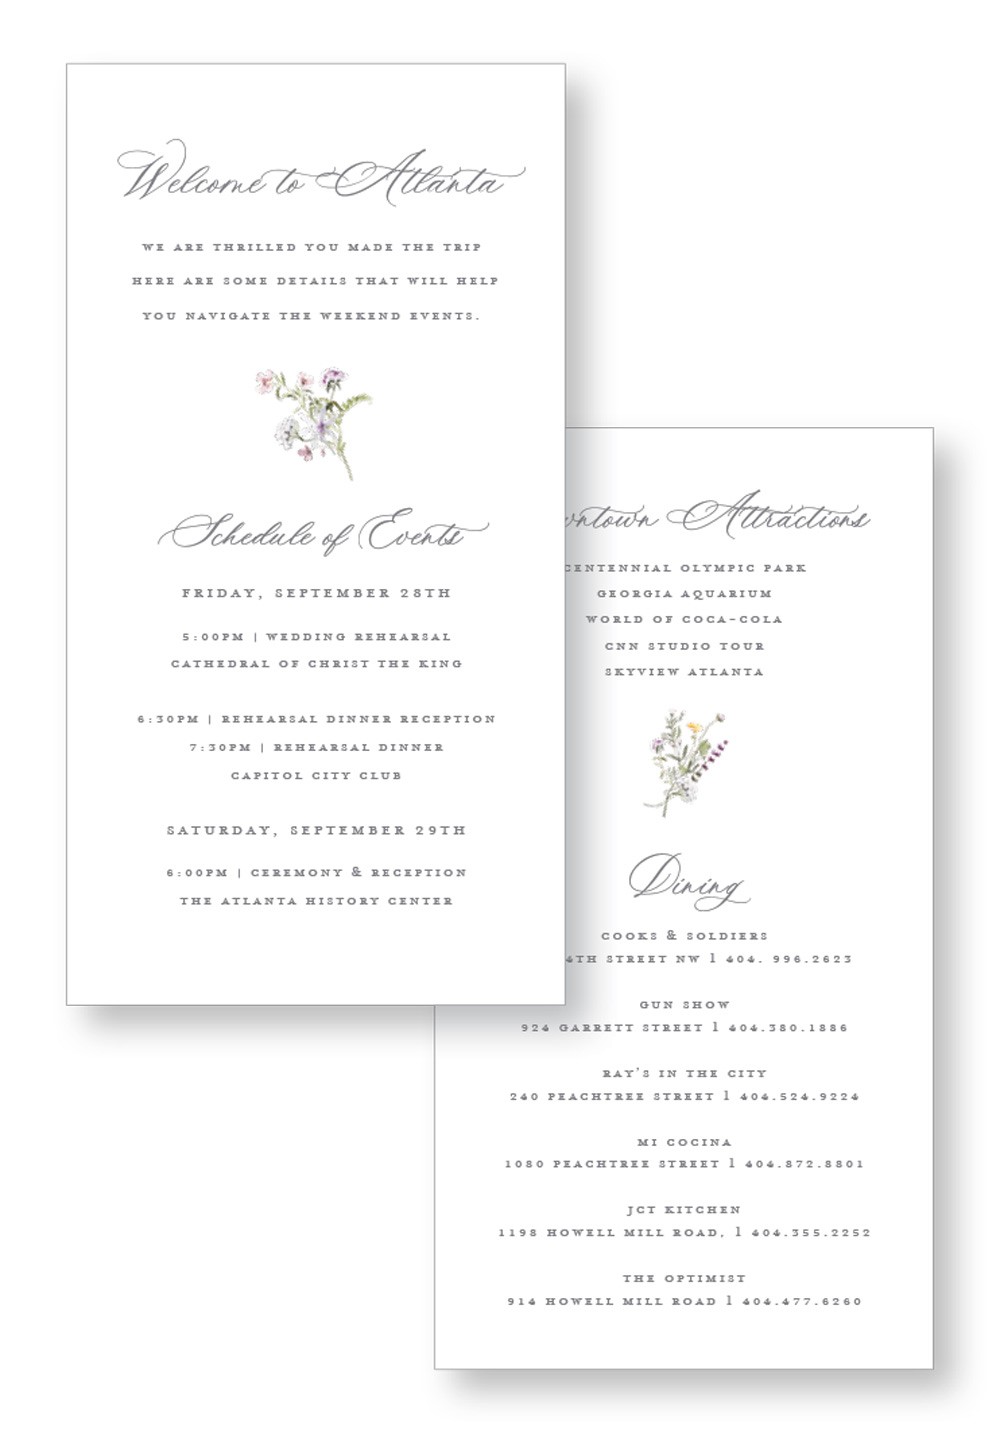 Camellia Itinerary | Paper Daisies Stationery